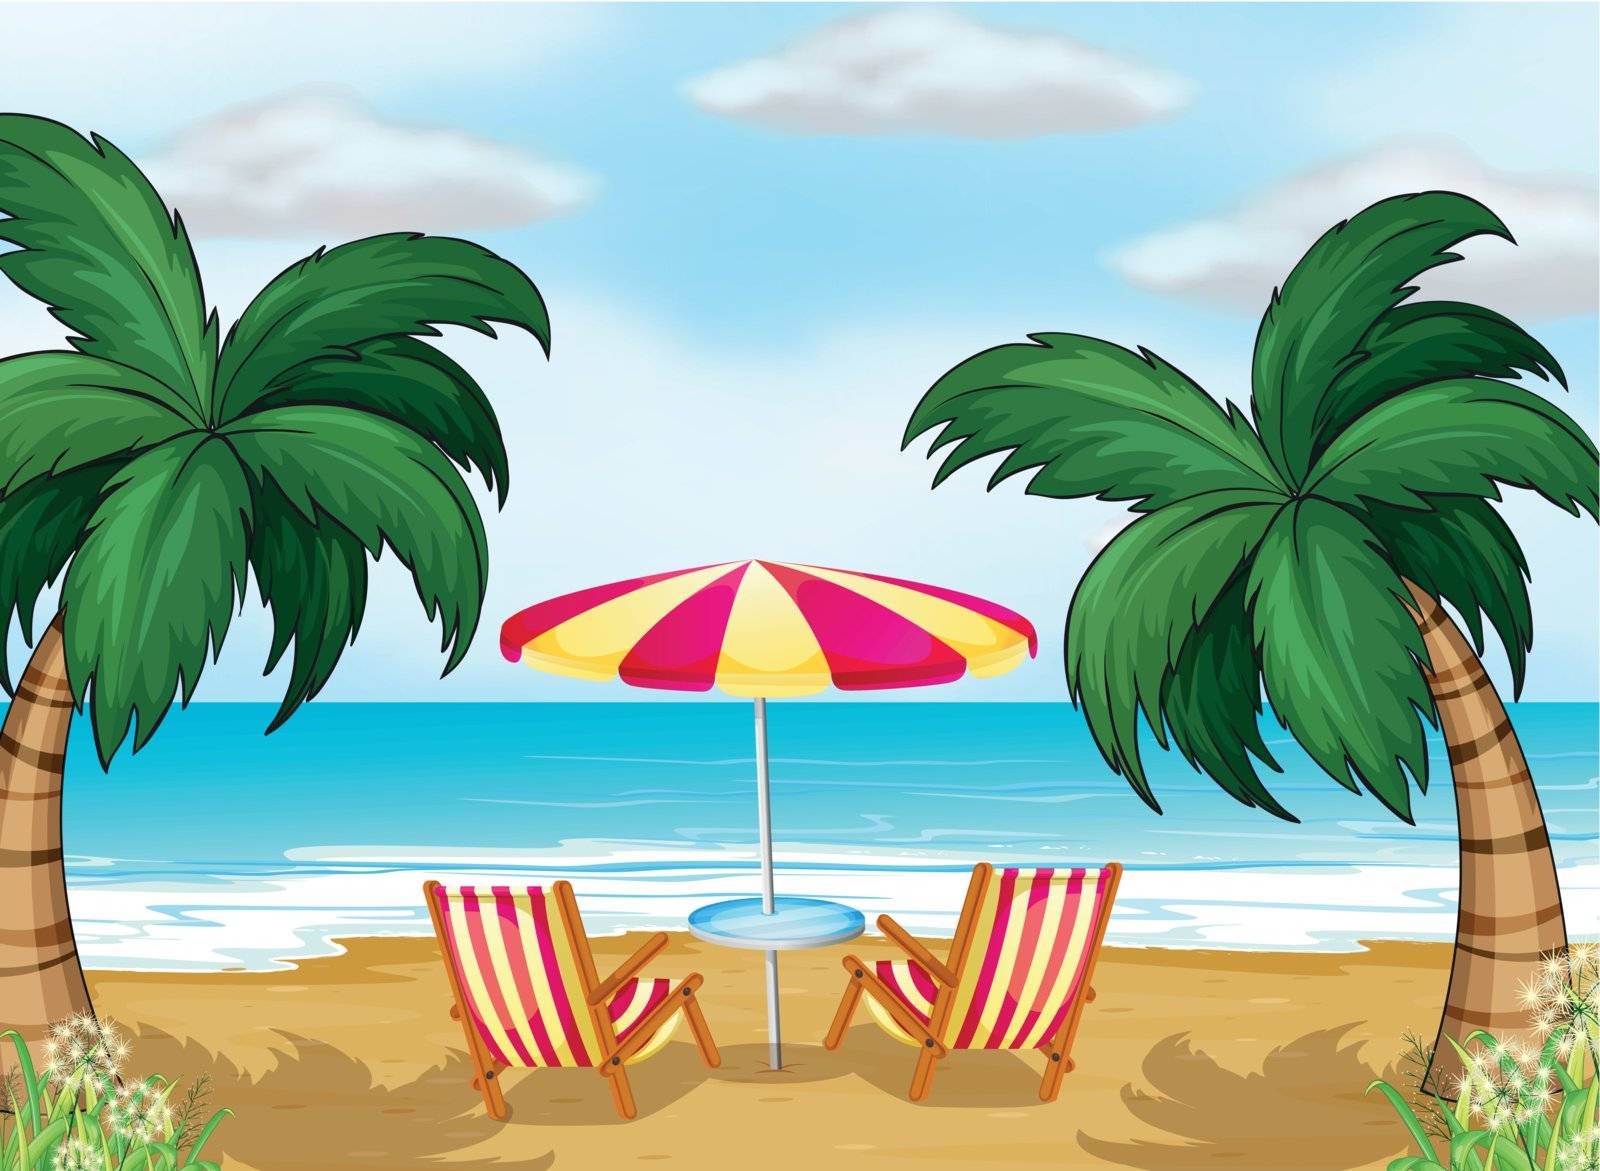 Illustration of the view of the beach with a beach umbrella and chairs